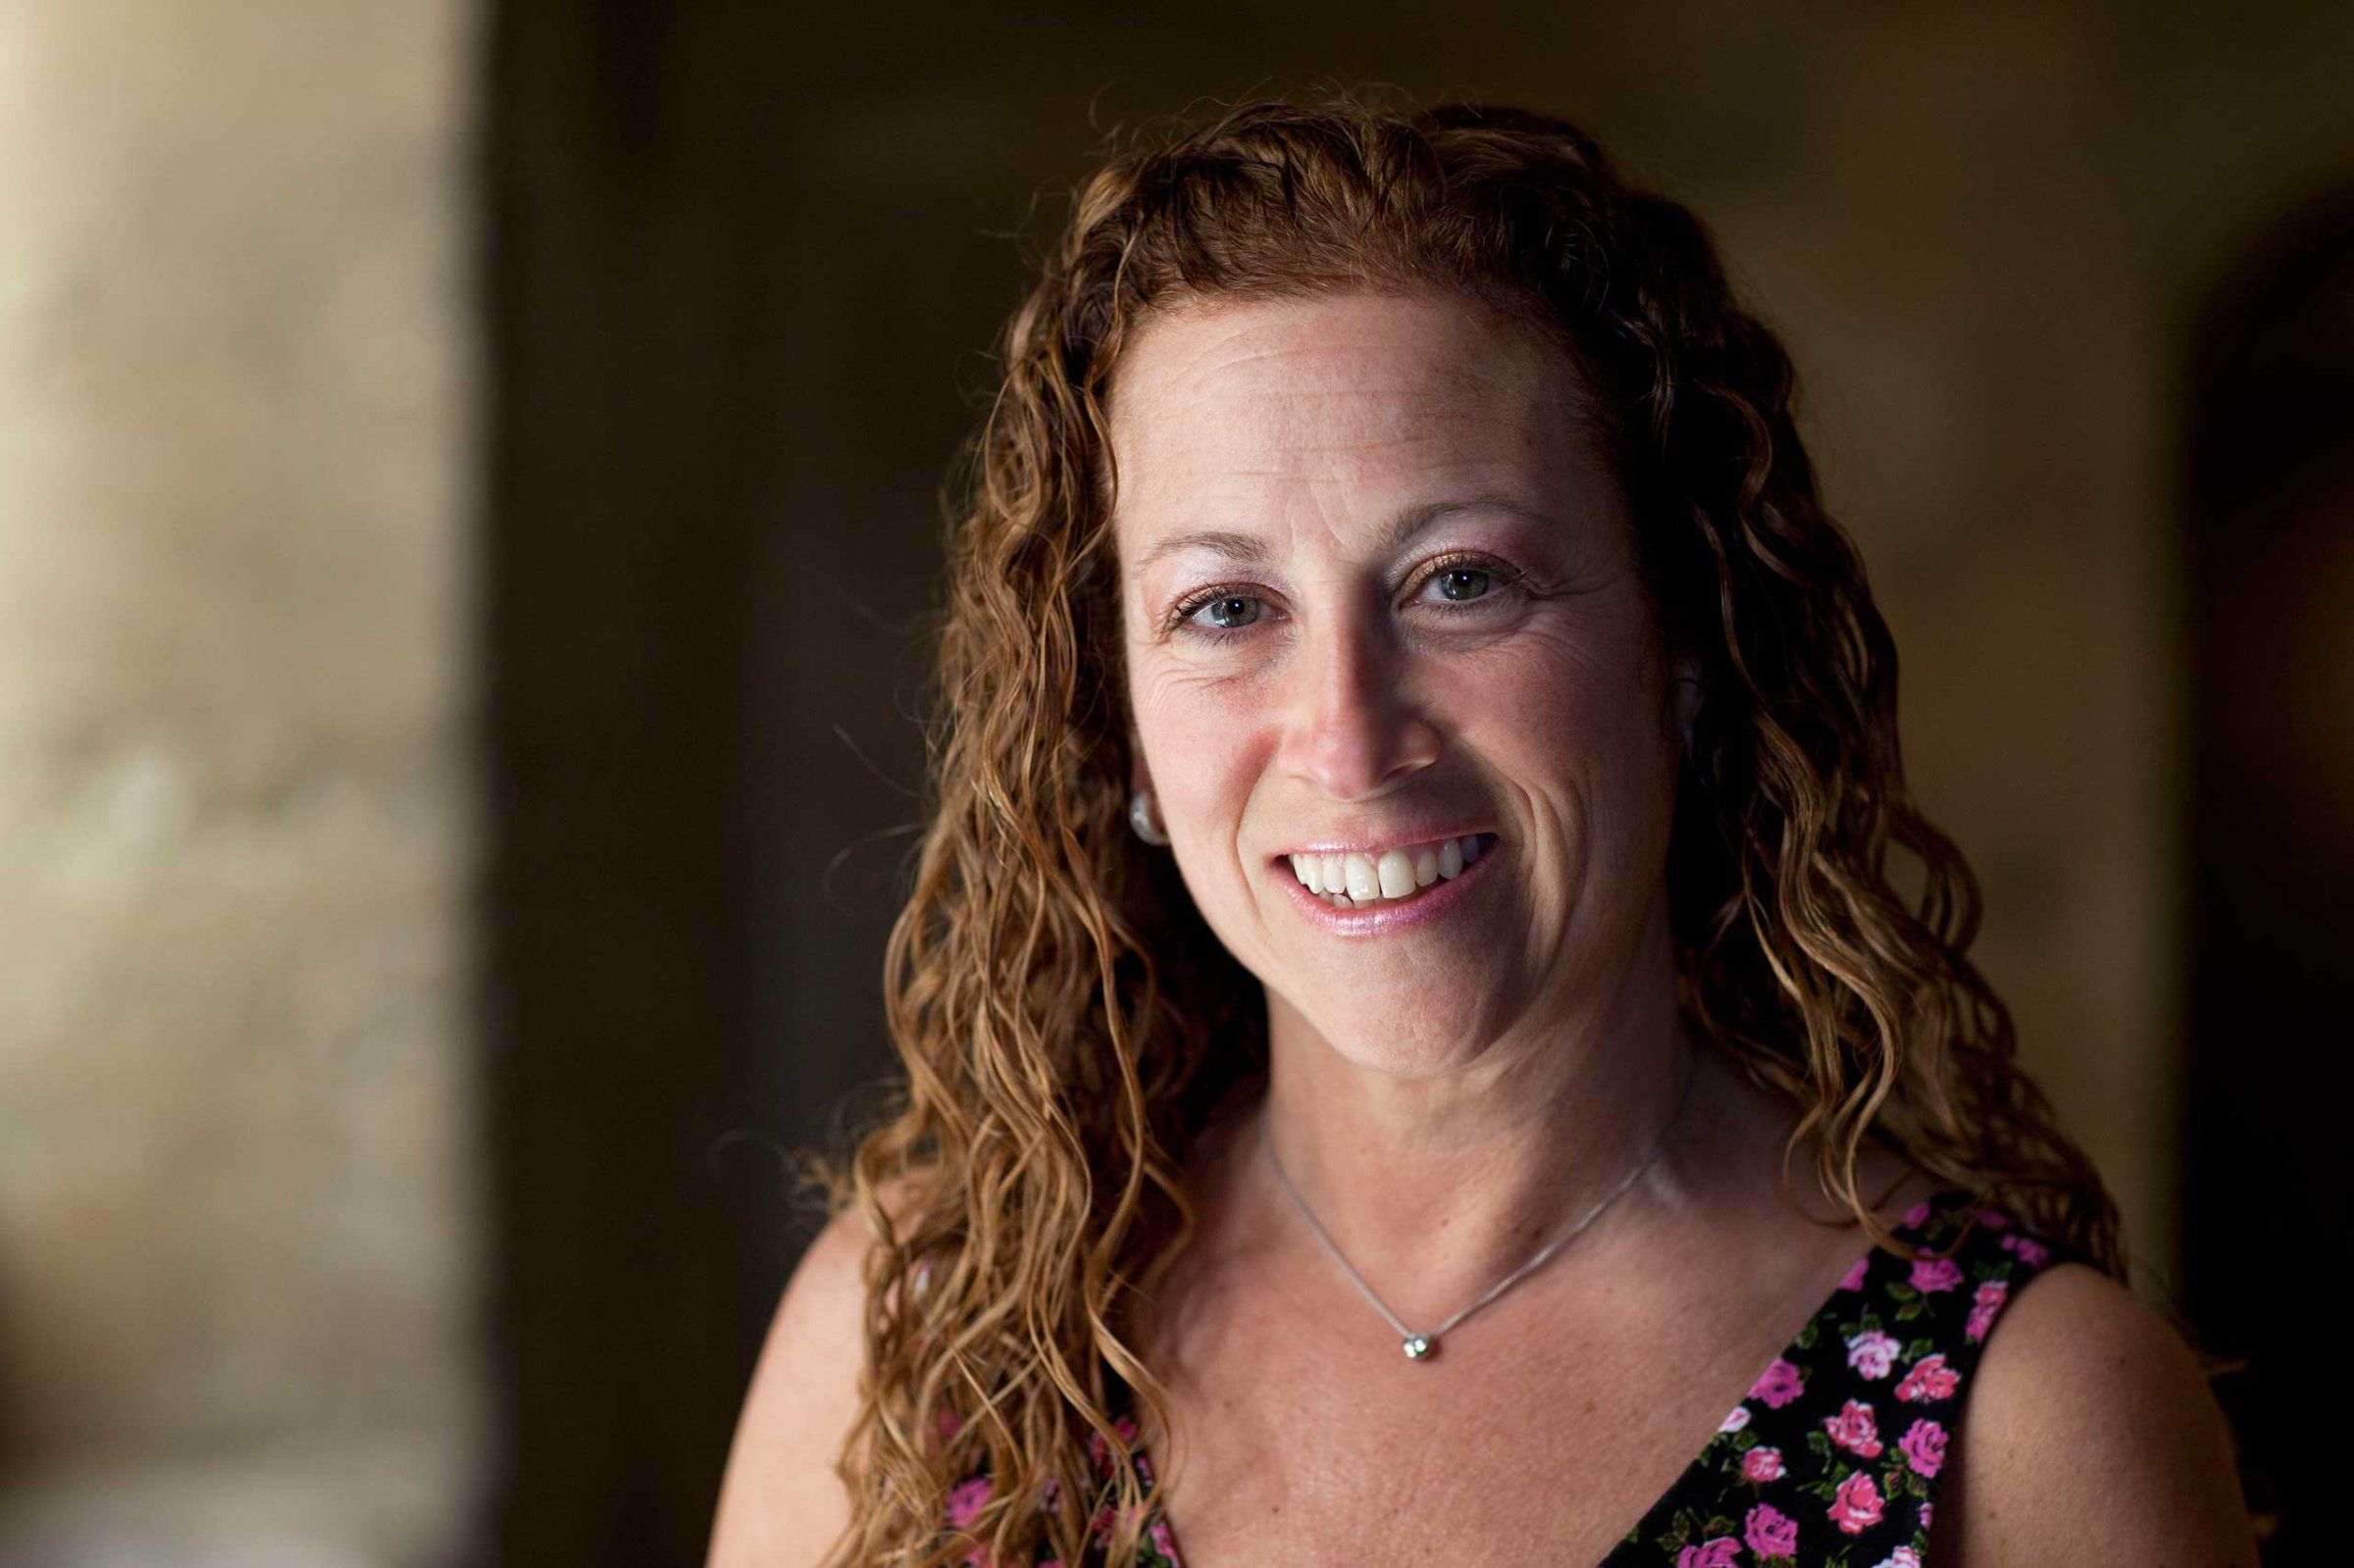 Writer Jodi Picoult poses for a portrait at the Oxford Literary Festival on March 28, 2012 in Oxford